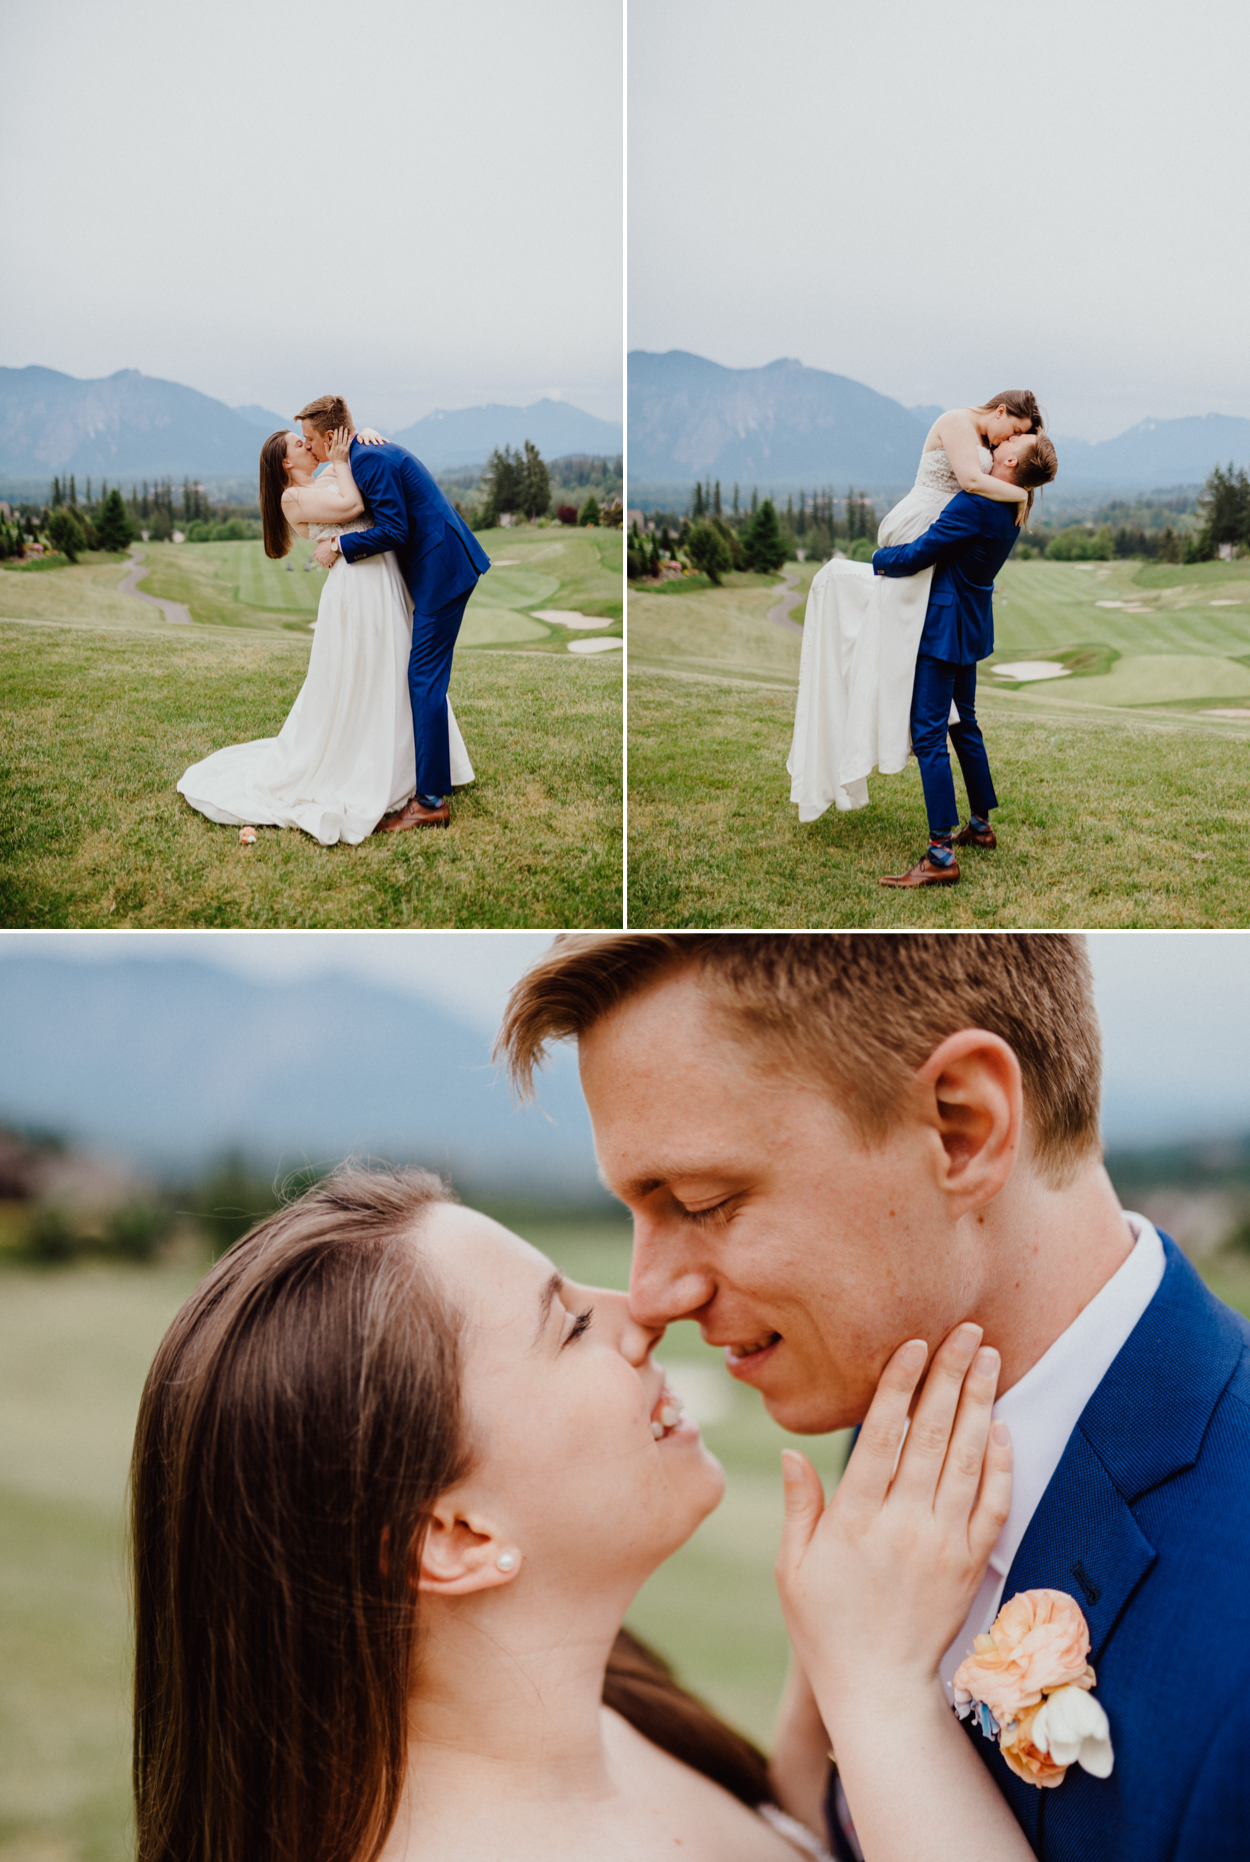 Different kiss poses for wedding photos